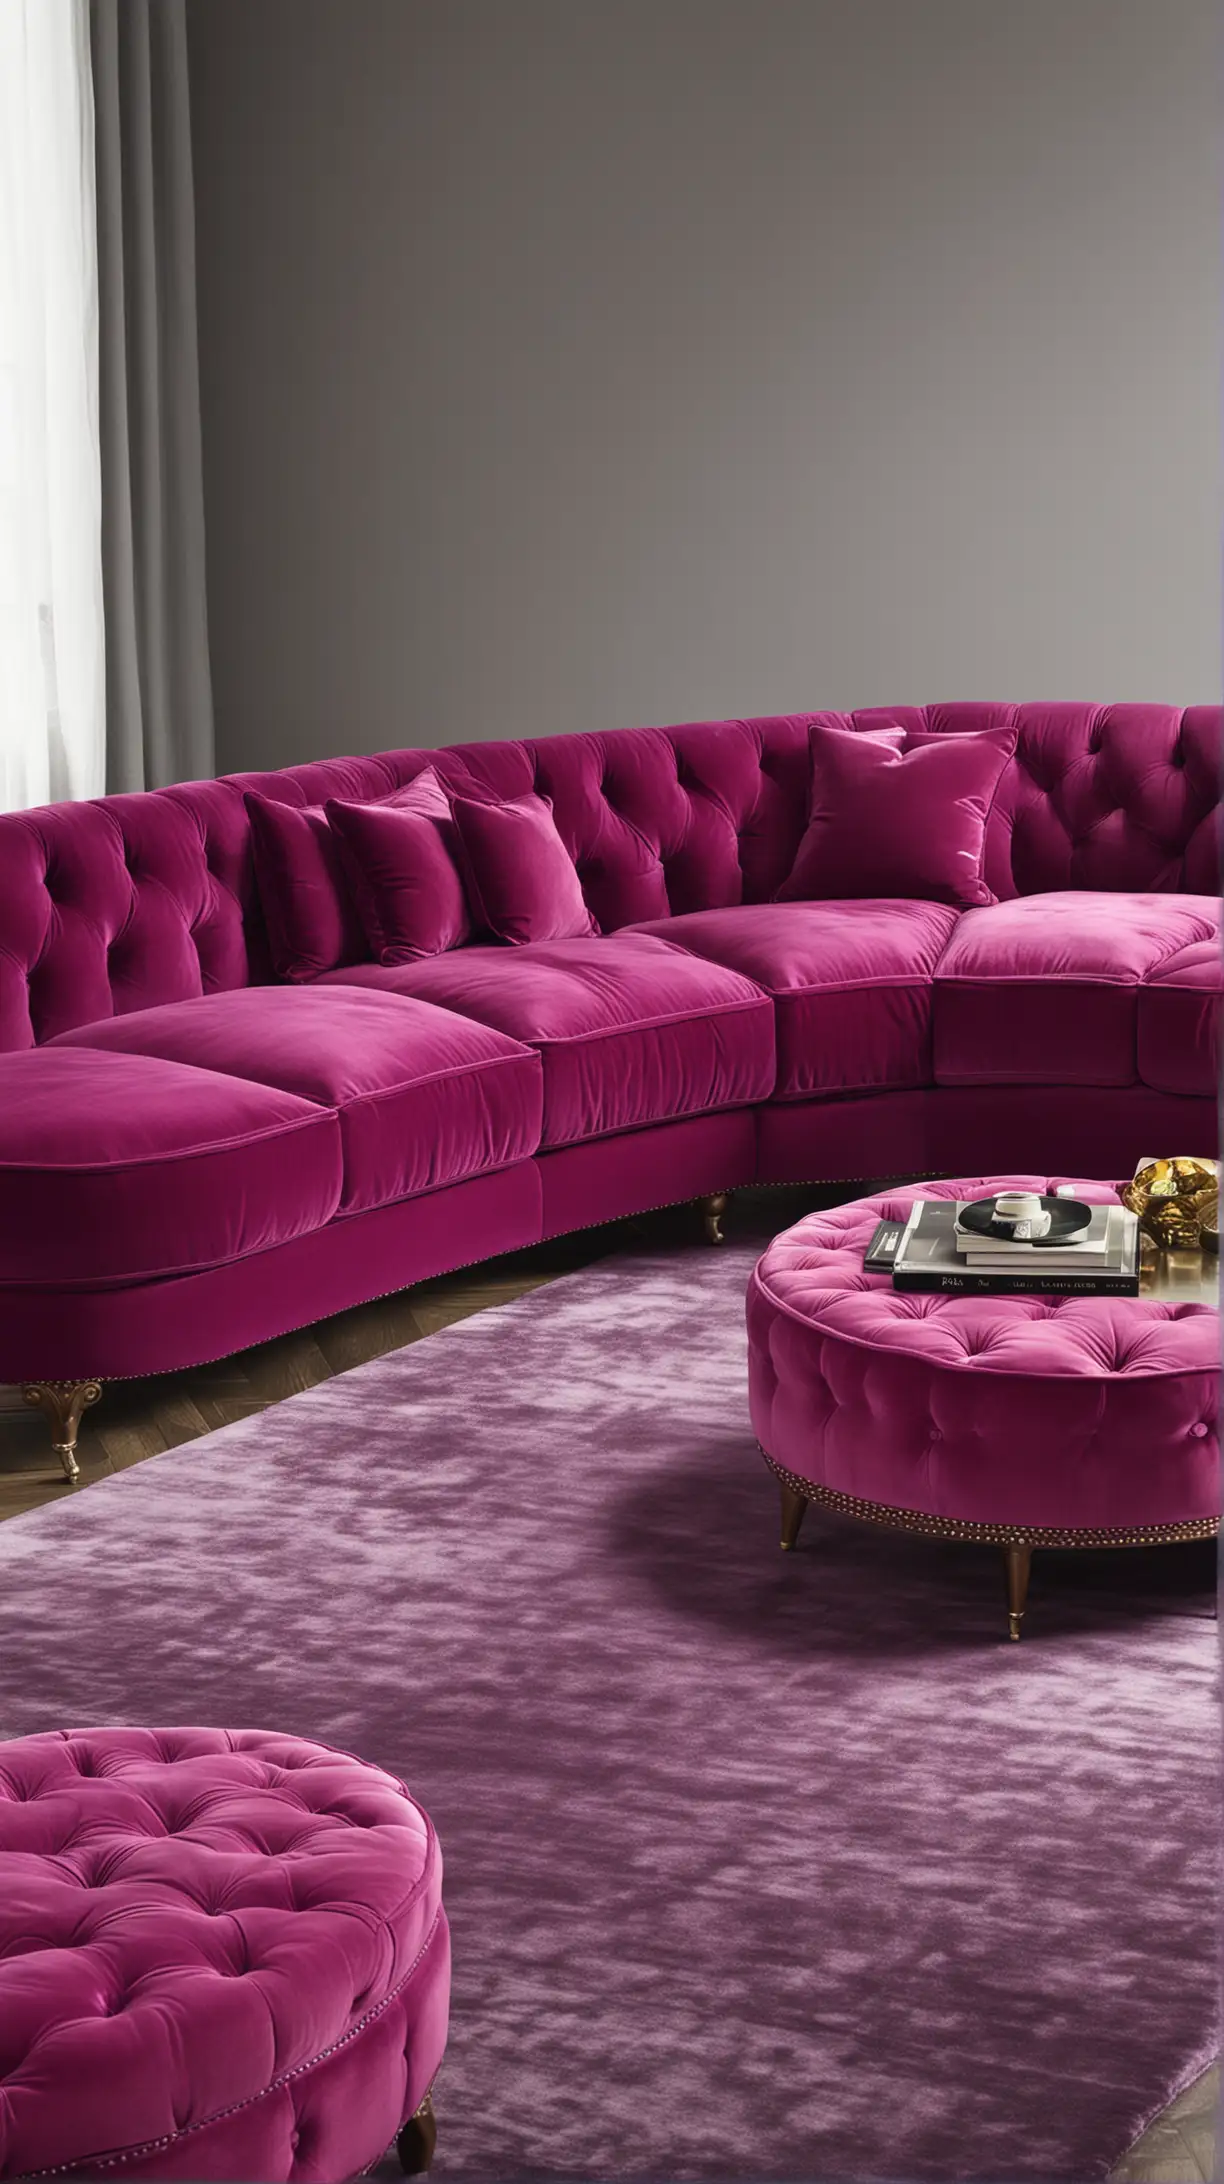 create an image for a baddie living room idea on this theme [Velvet Statement Couch

I adore the idea of a plush velvet couch as the centerpiece of a living room. Choosing a vibrant color like deep purple or bold fuchsia not only screams luxury but also sets the tone for a space that’s both inviting and chic.]
Make sure to create the exact idea image and include the sofa. The picture should be clear and not any single item be cut from the frame but fit in the frame.  